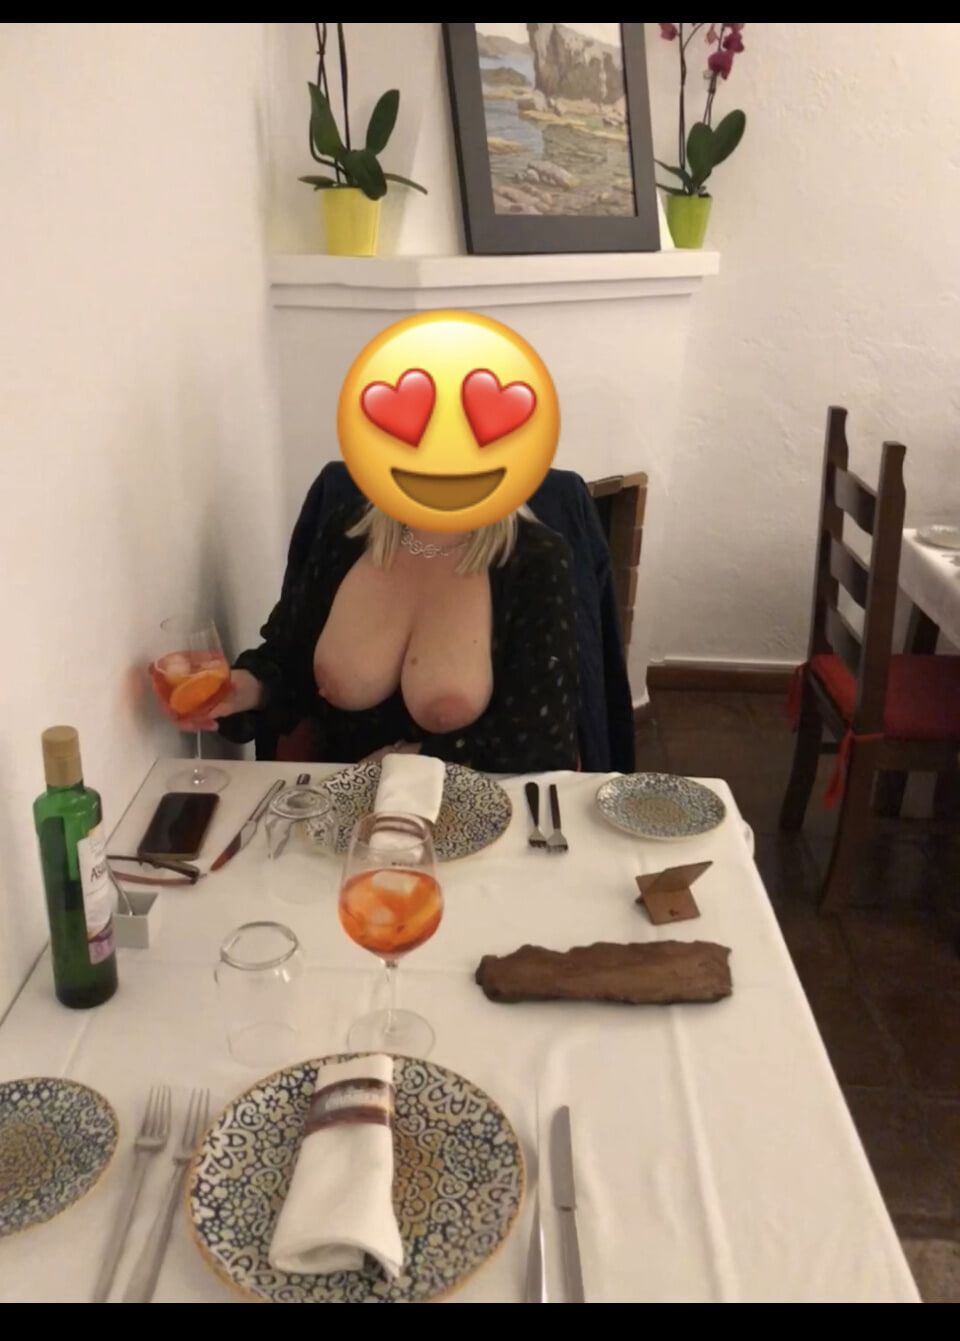 Dinner and boobs